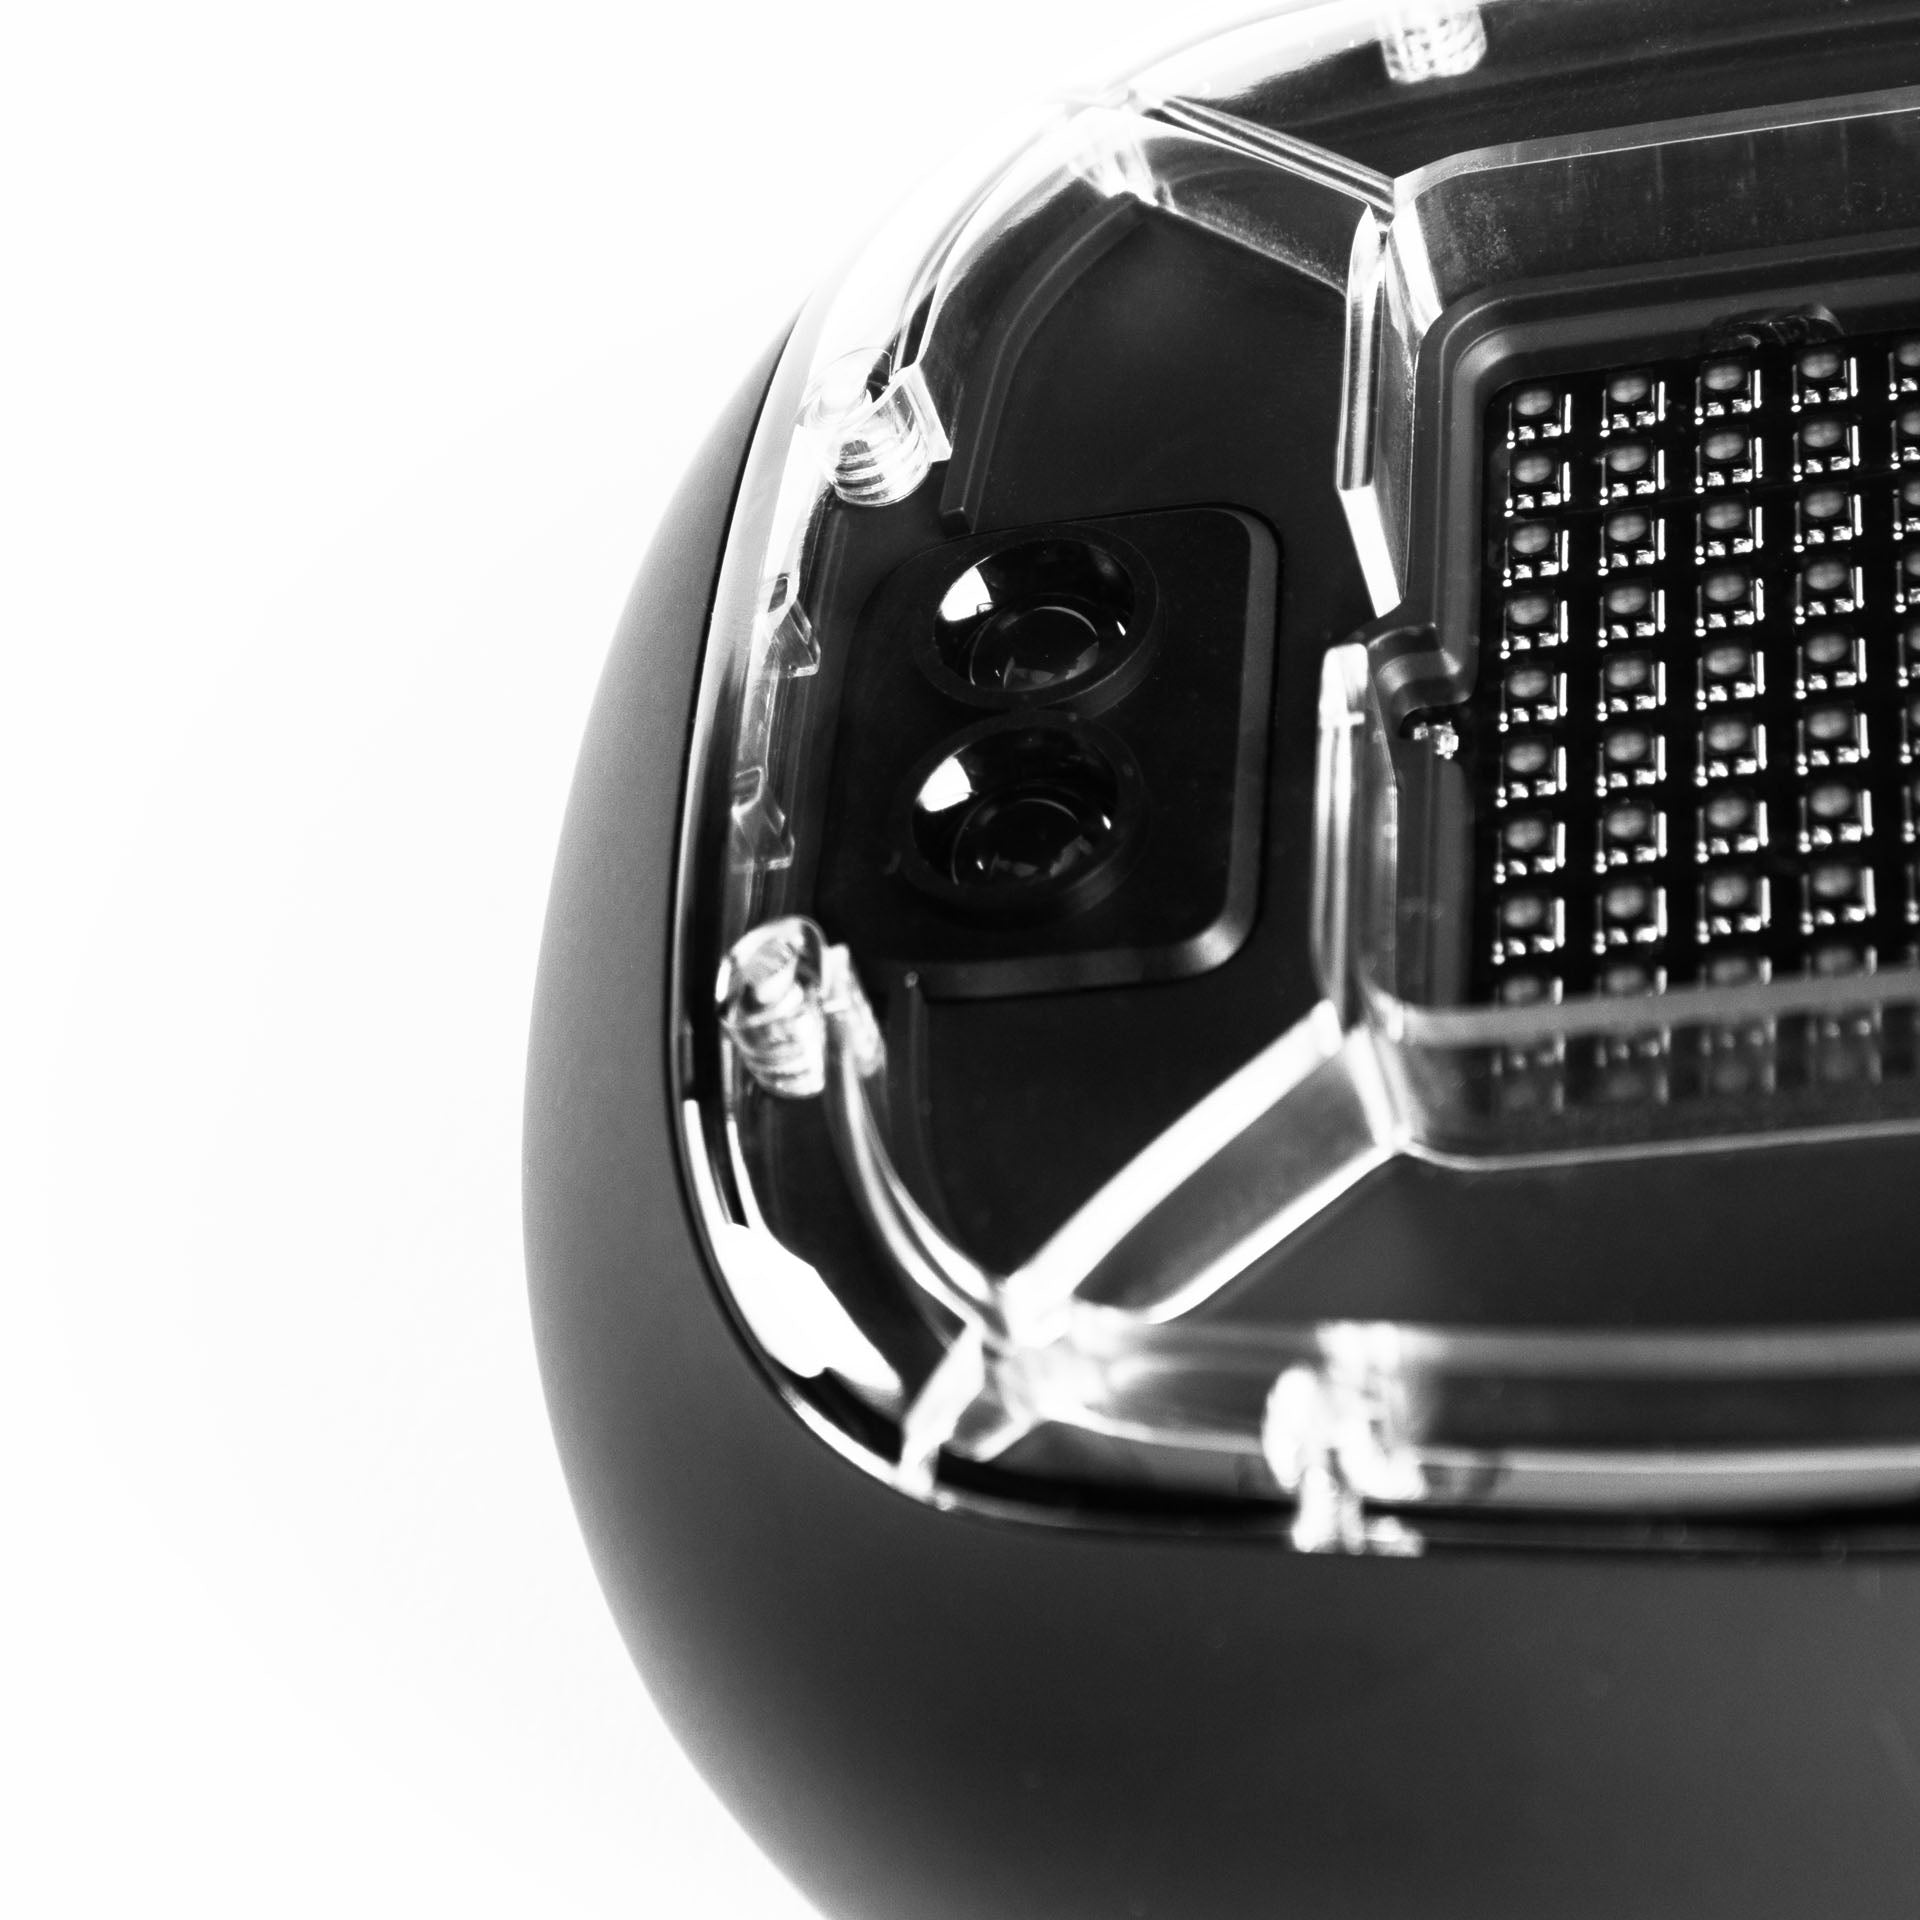 A close-up black and white image of a high-tech device with a robust black exterior and a clear section revealing part of its inner components. There are two circular sensors and a grid of LED lights on the center. The design suggests a durable construction with a modern, sophisticated function, ready for athletic training.